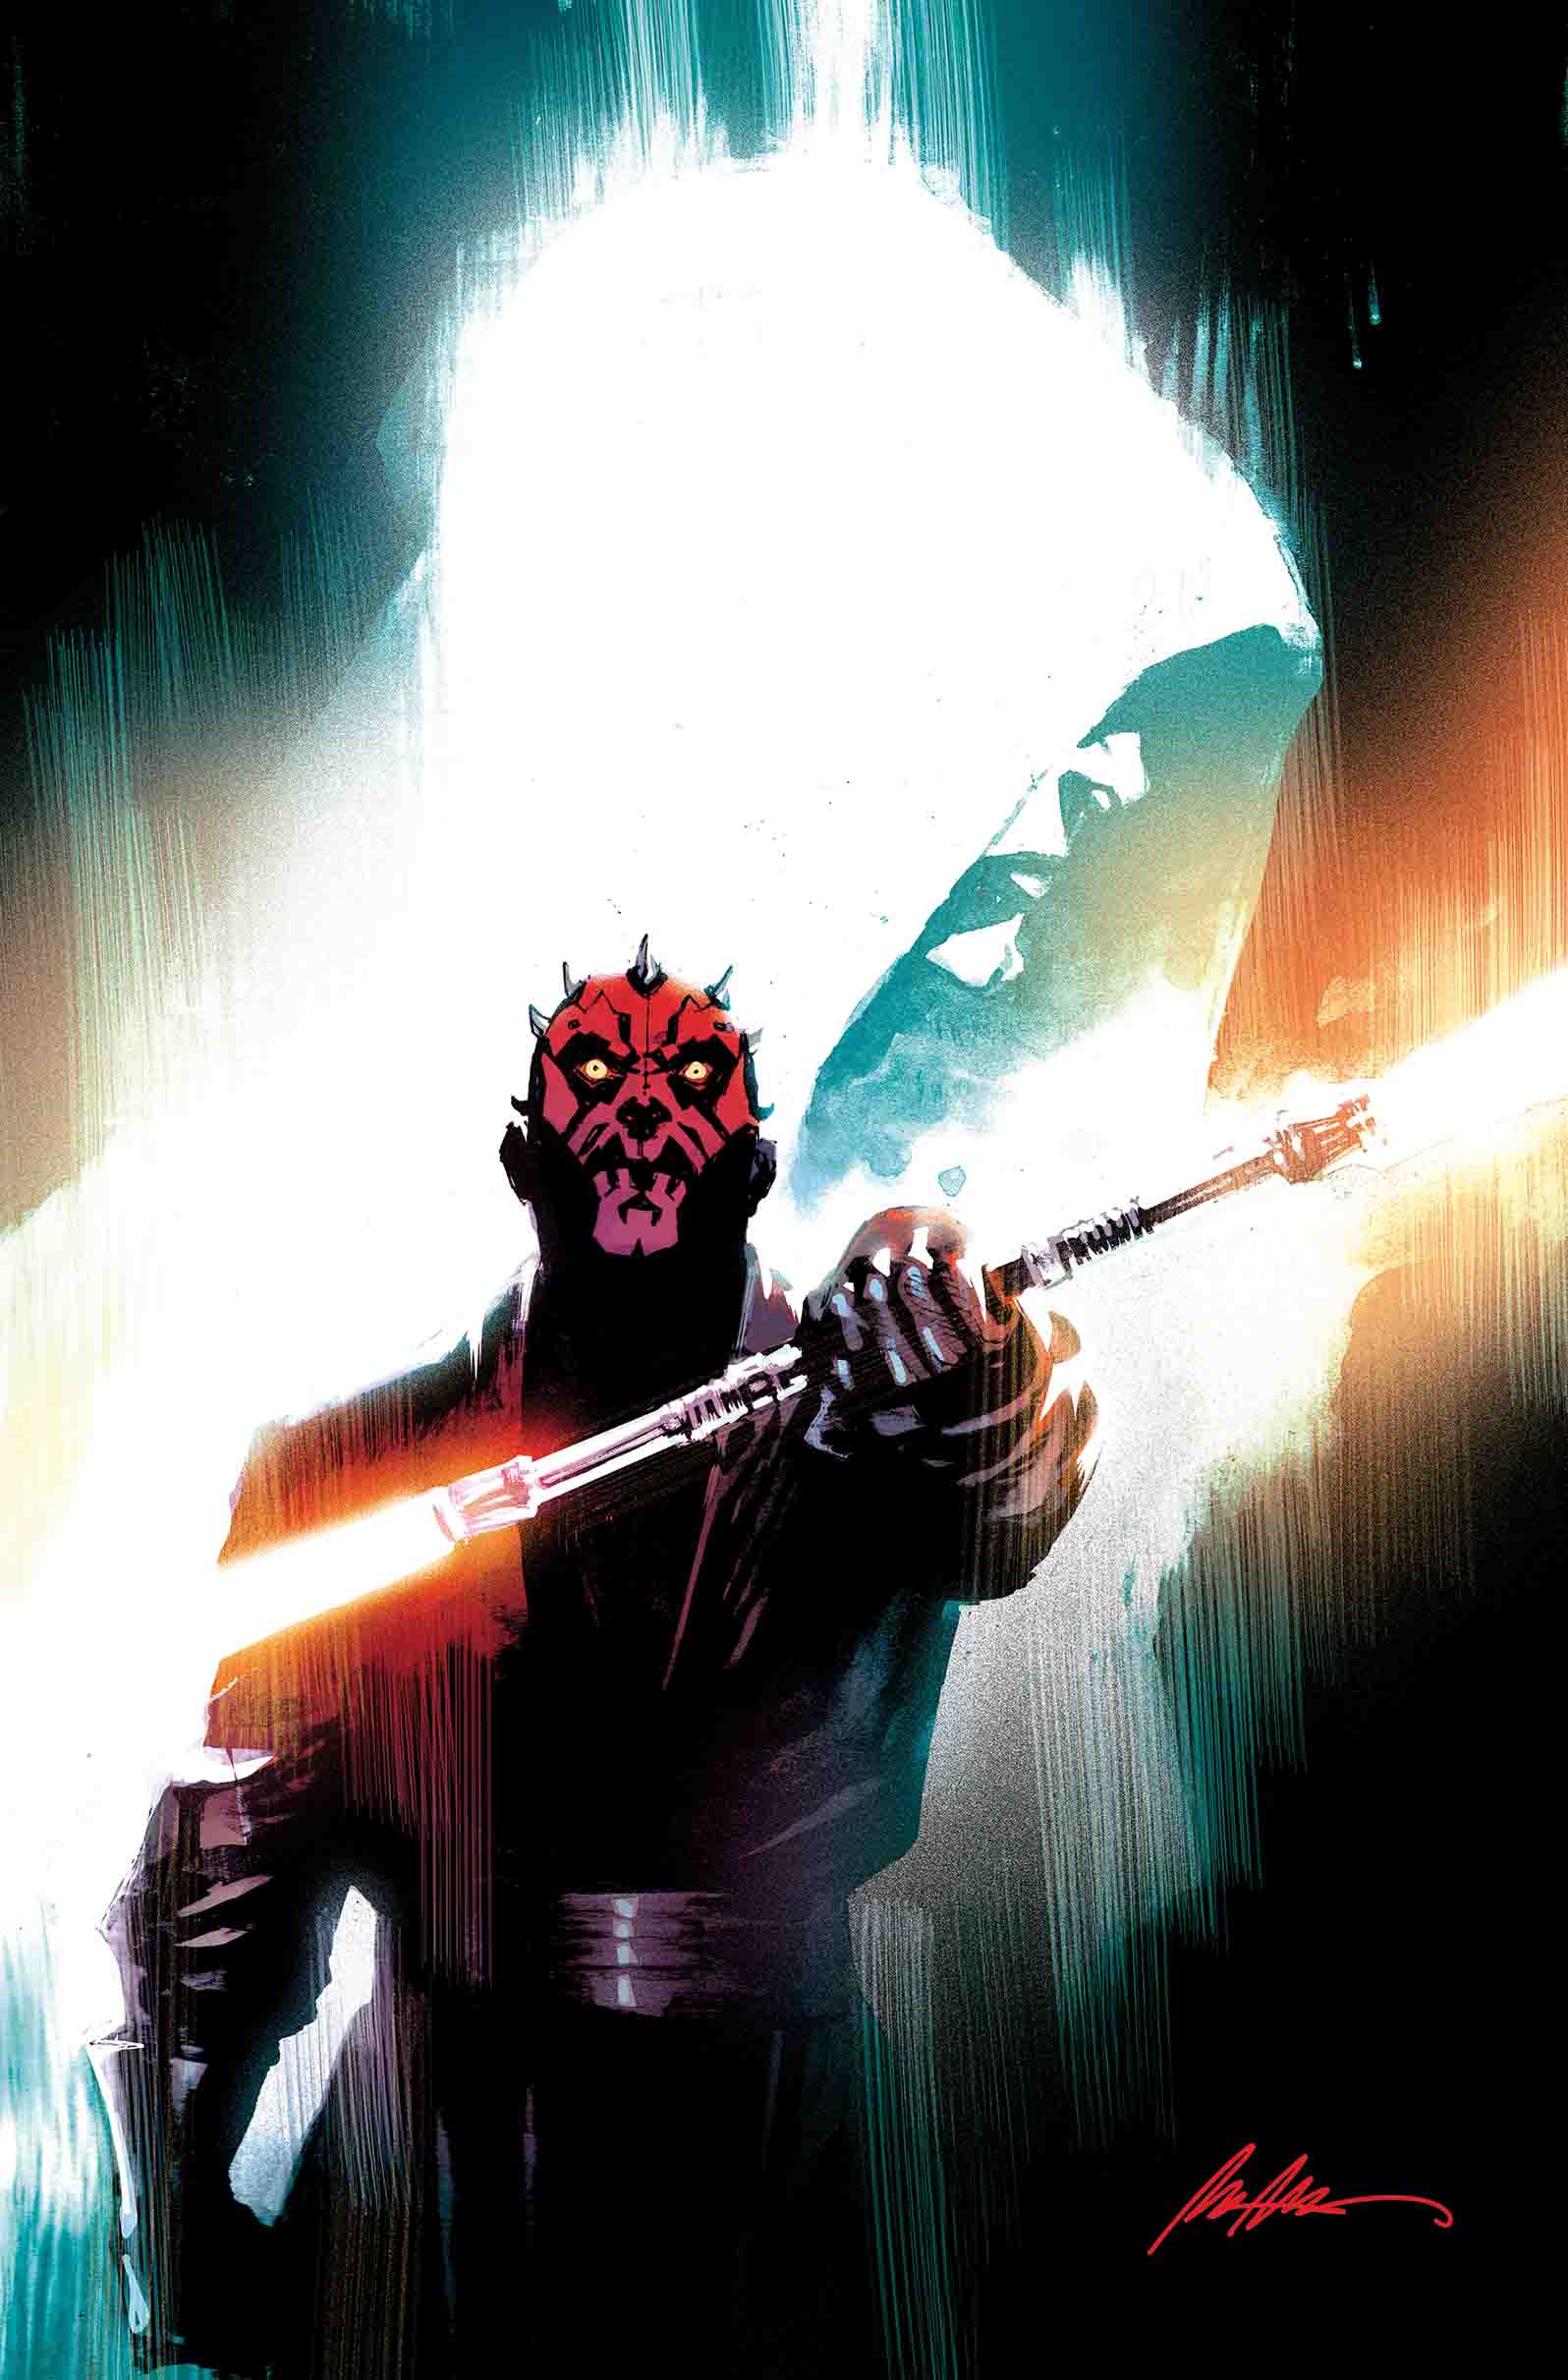 Star Wars March 2017 Solicitations